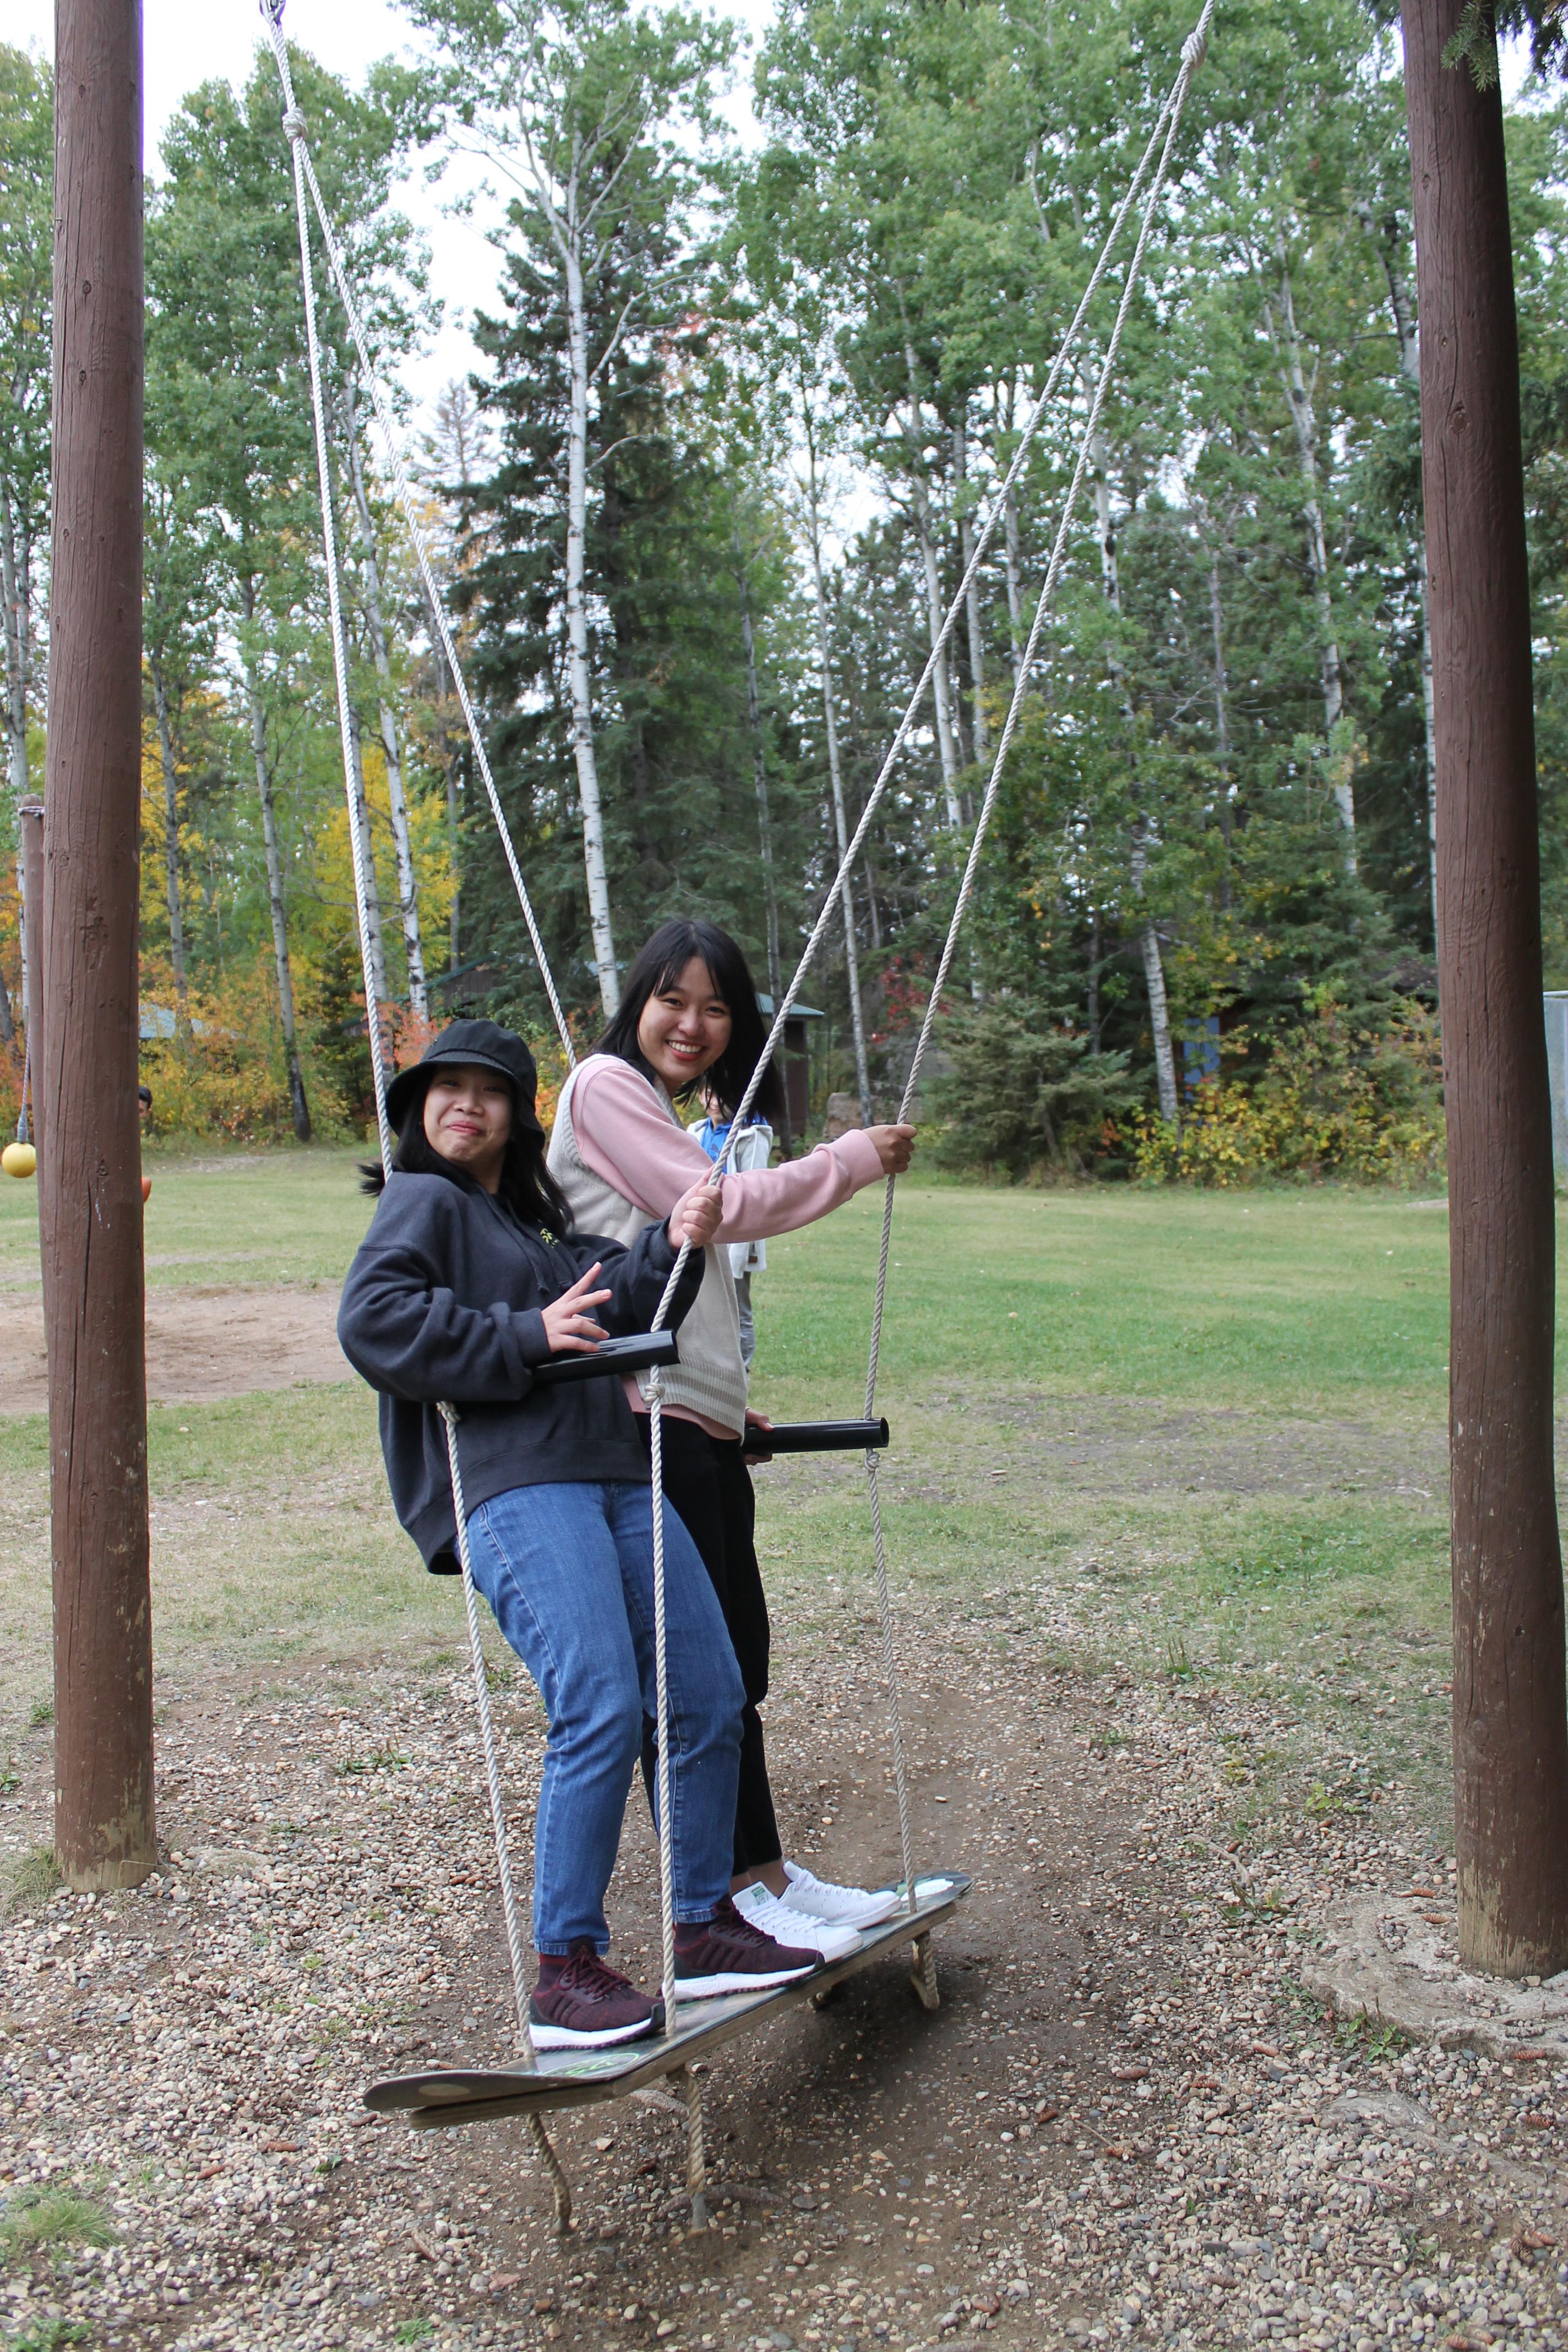 students on swing